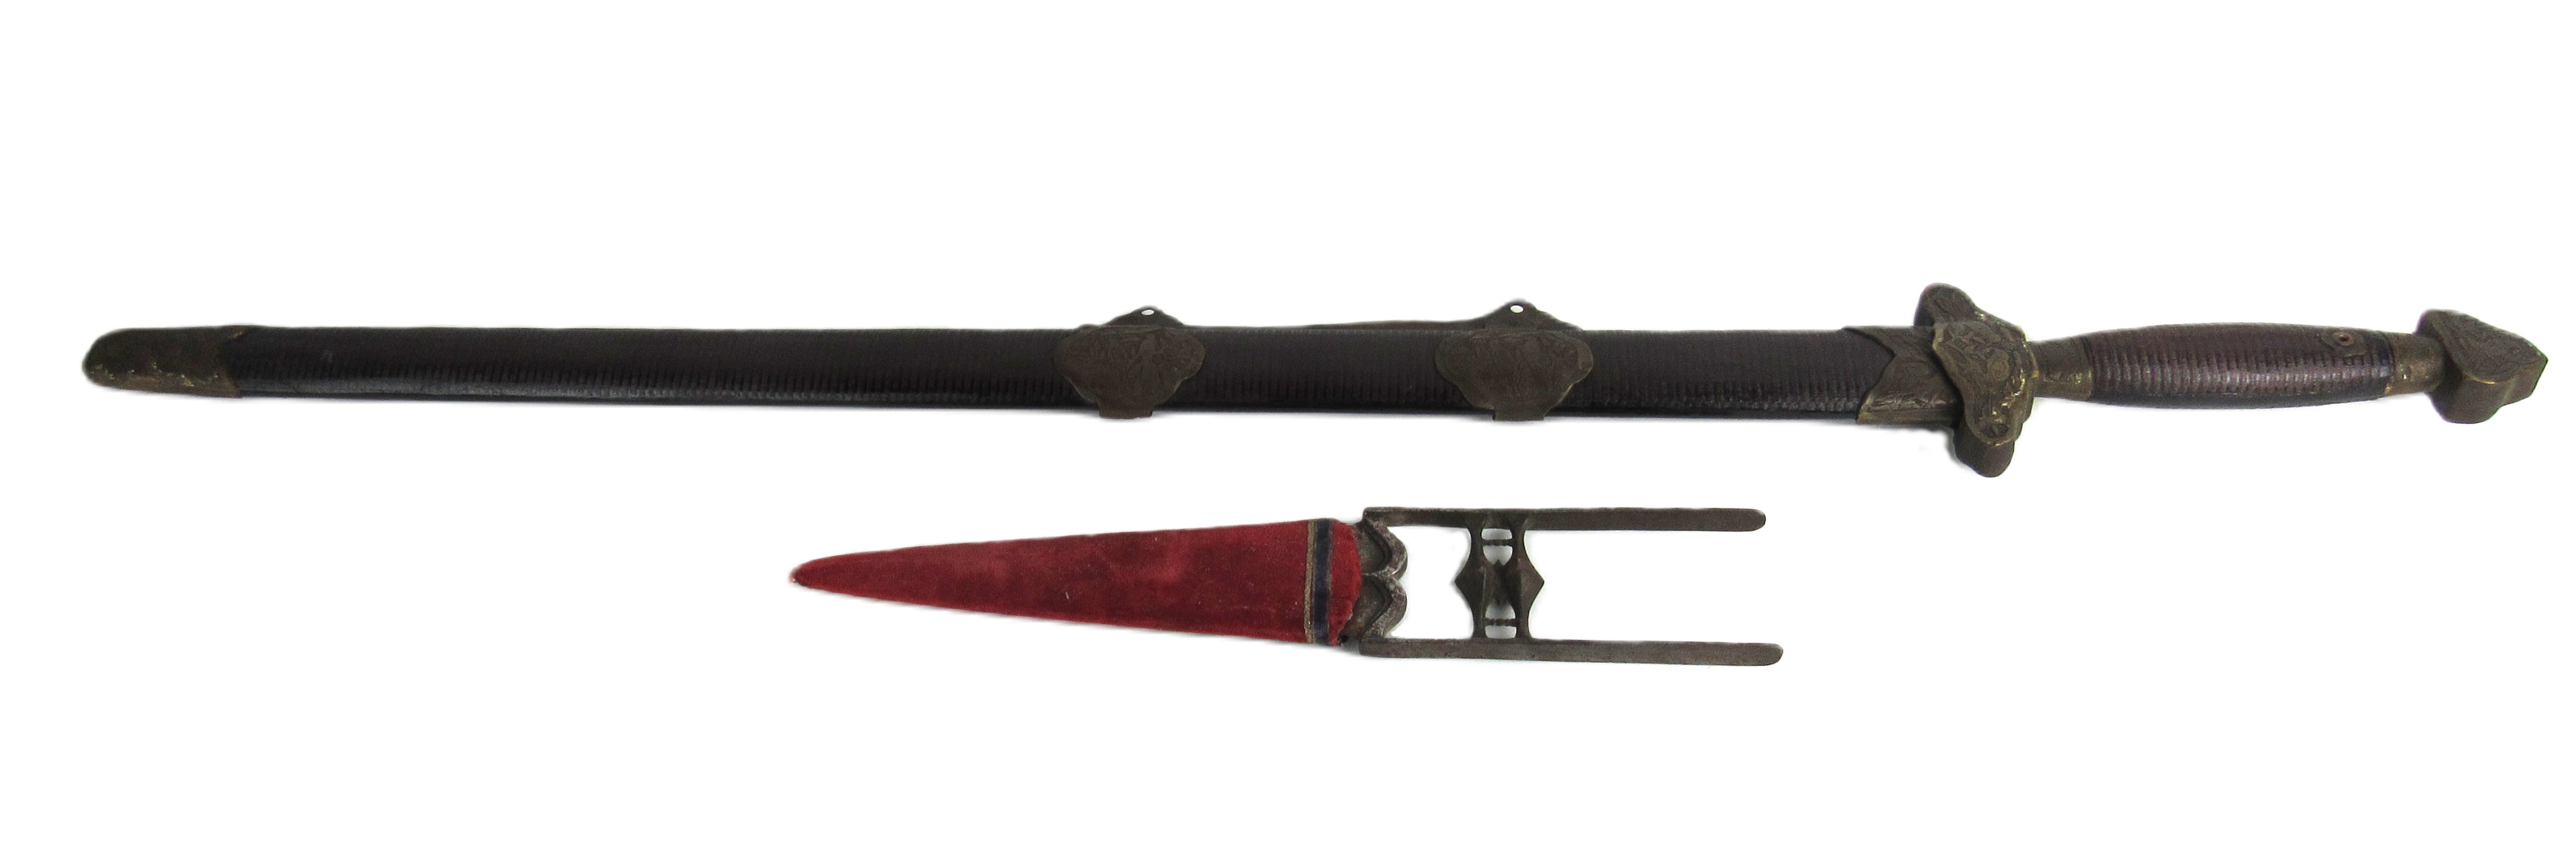 Militaria: An early 20th Century Chinese Long Dress Sword, the cruciform handle with each pommel